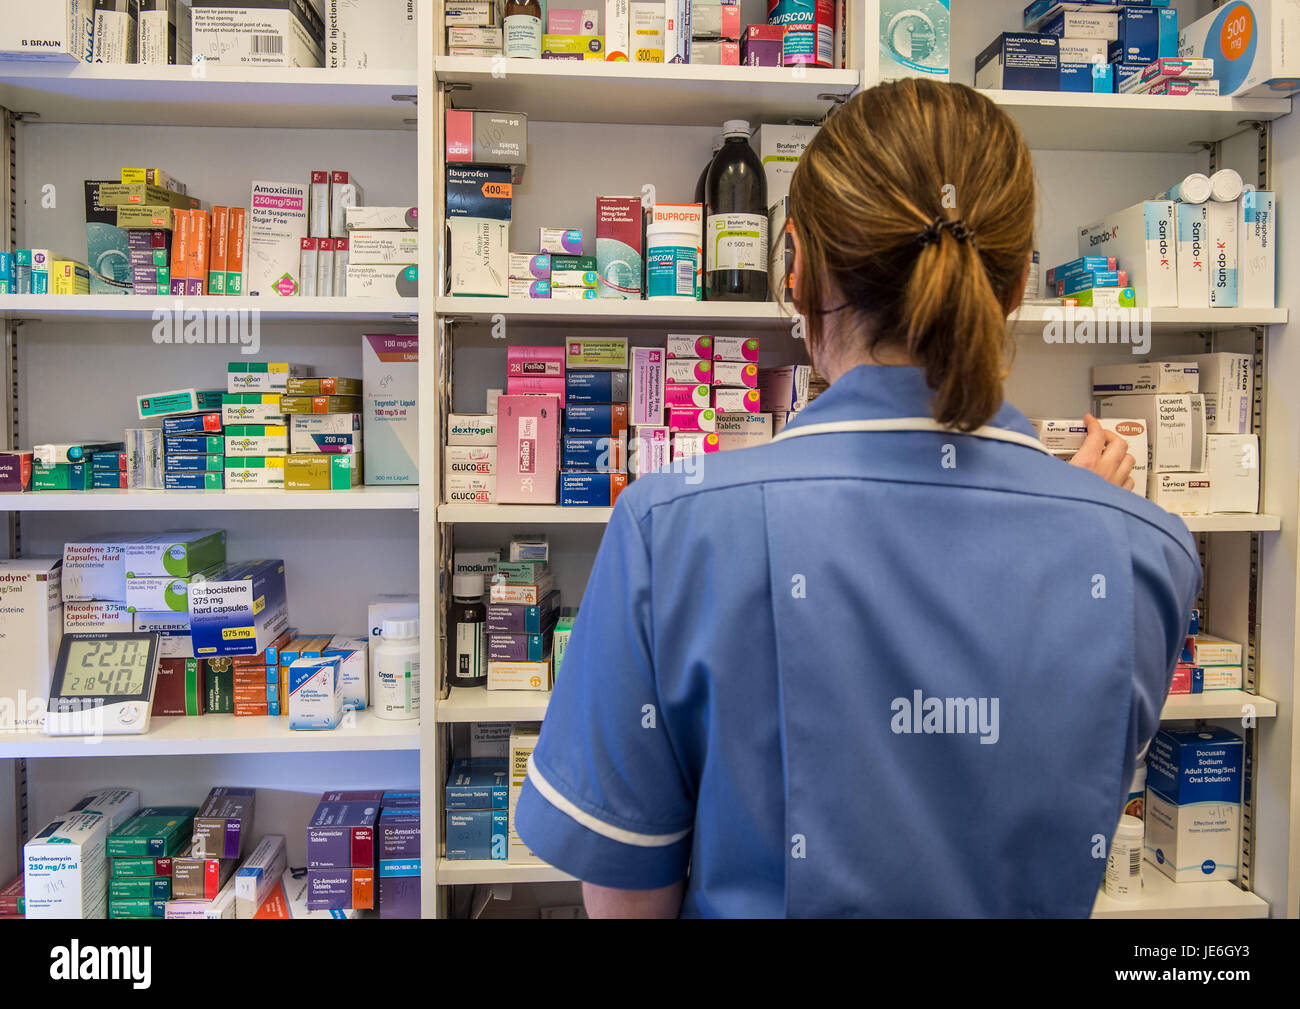 Copyrighted Image by Paul Slater/PSI - A nurse choosing medicine. Stock Photo